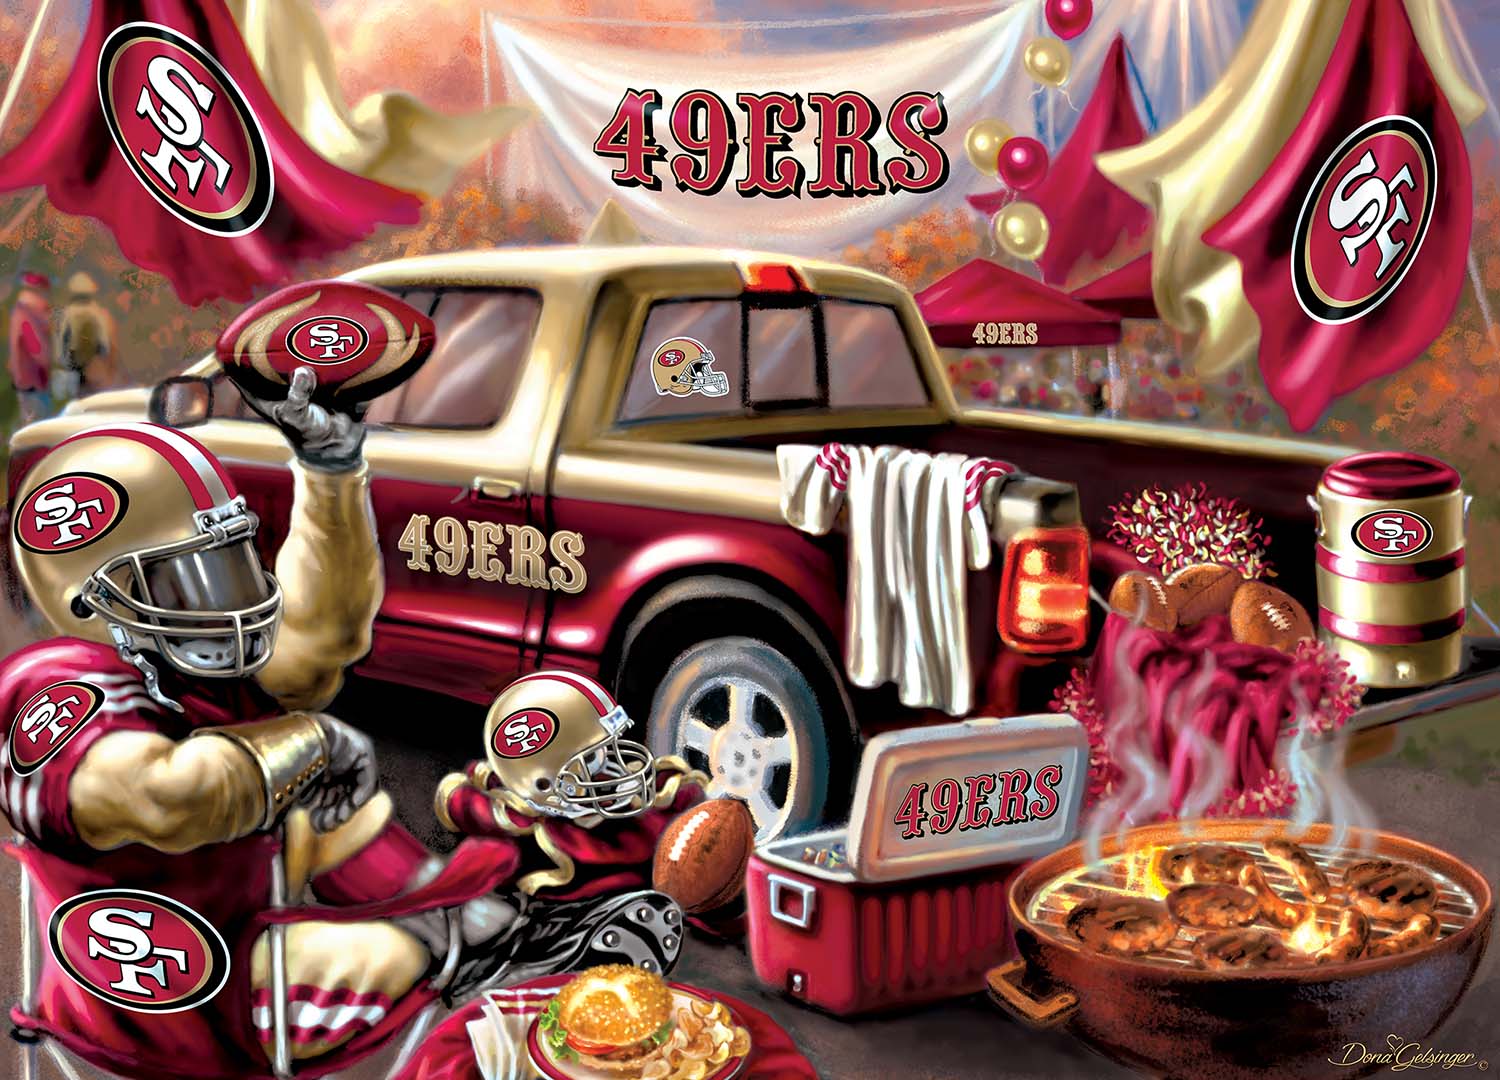 San Francisco 49ers Gameday Sports Jigsaw Puzzle